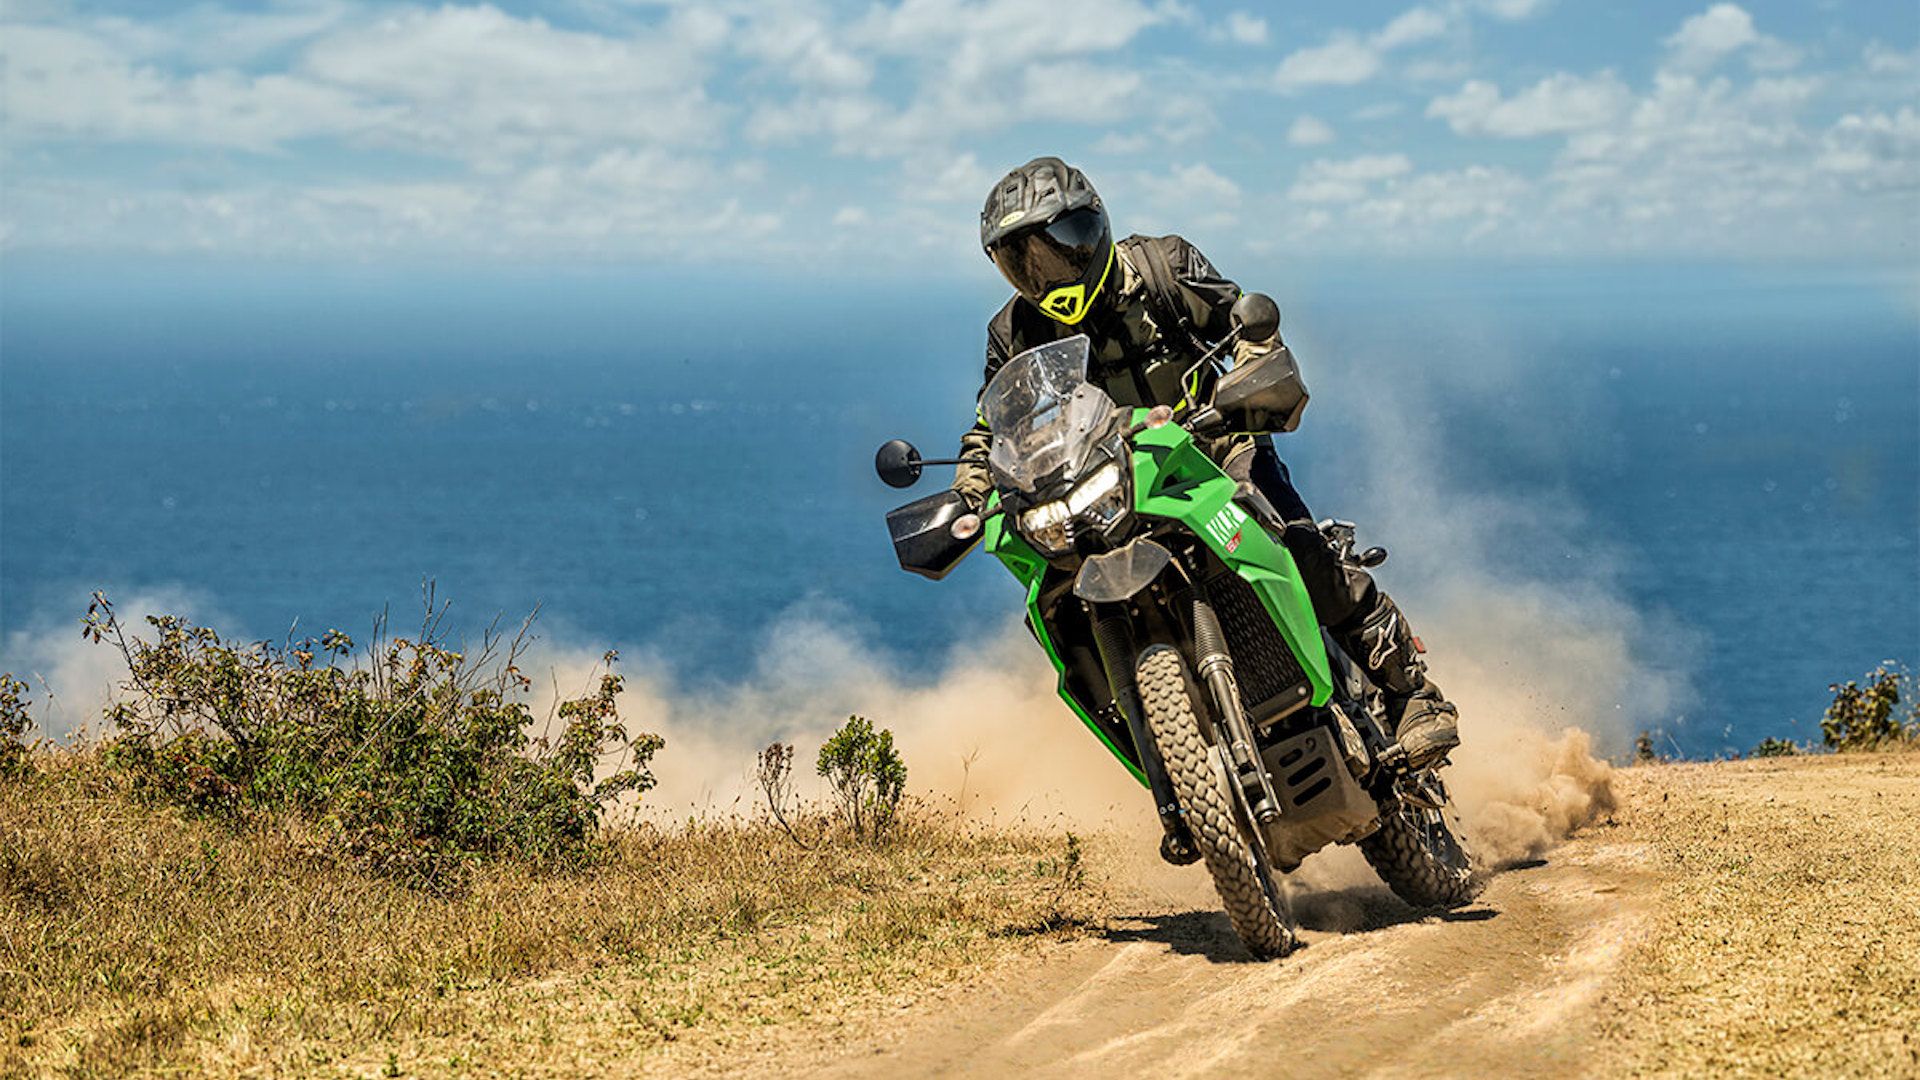 Why The Kawasaki KLR 650 S Is The Ultimate DualSport Motorcycle